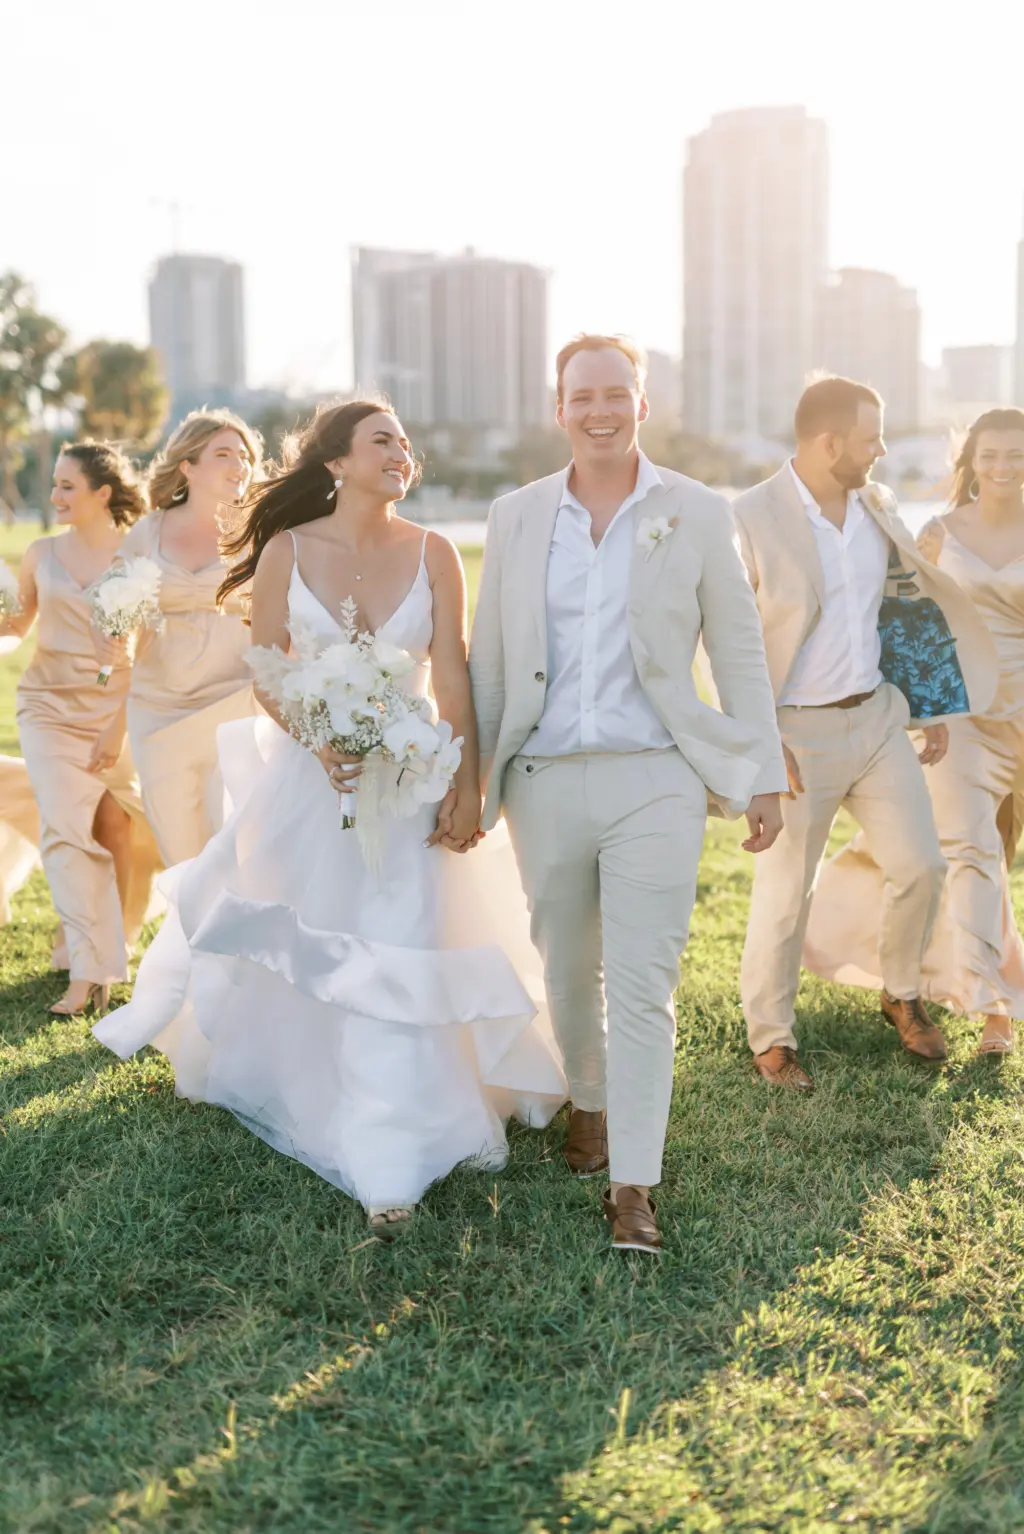 Bride and Groom Just Married Sunset Wedding Portrait | Satin Cream Champagne Bridesmaid Dress Inspiration | White Spaghetti Strap Open Back A-Line Layered Tulle Hayley Paige Bridal Wedding Dress Ideas